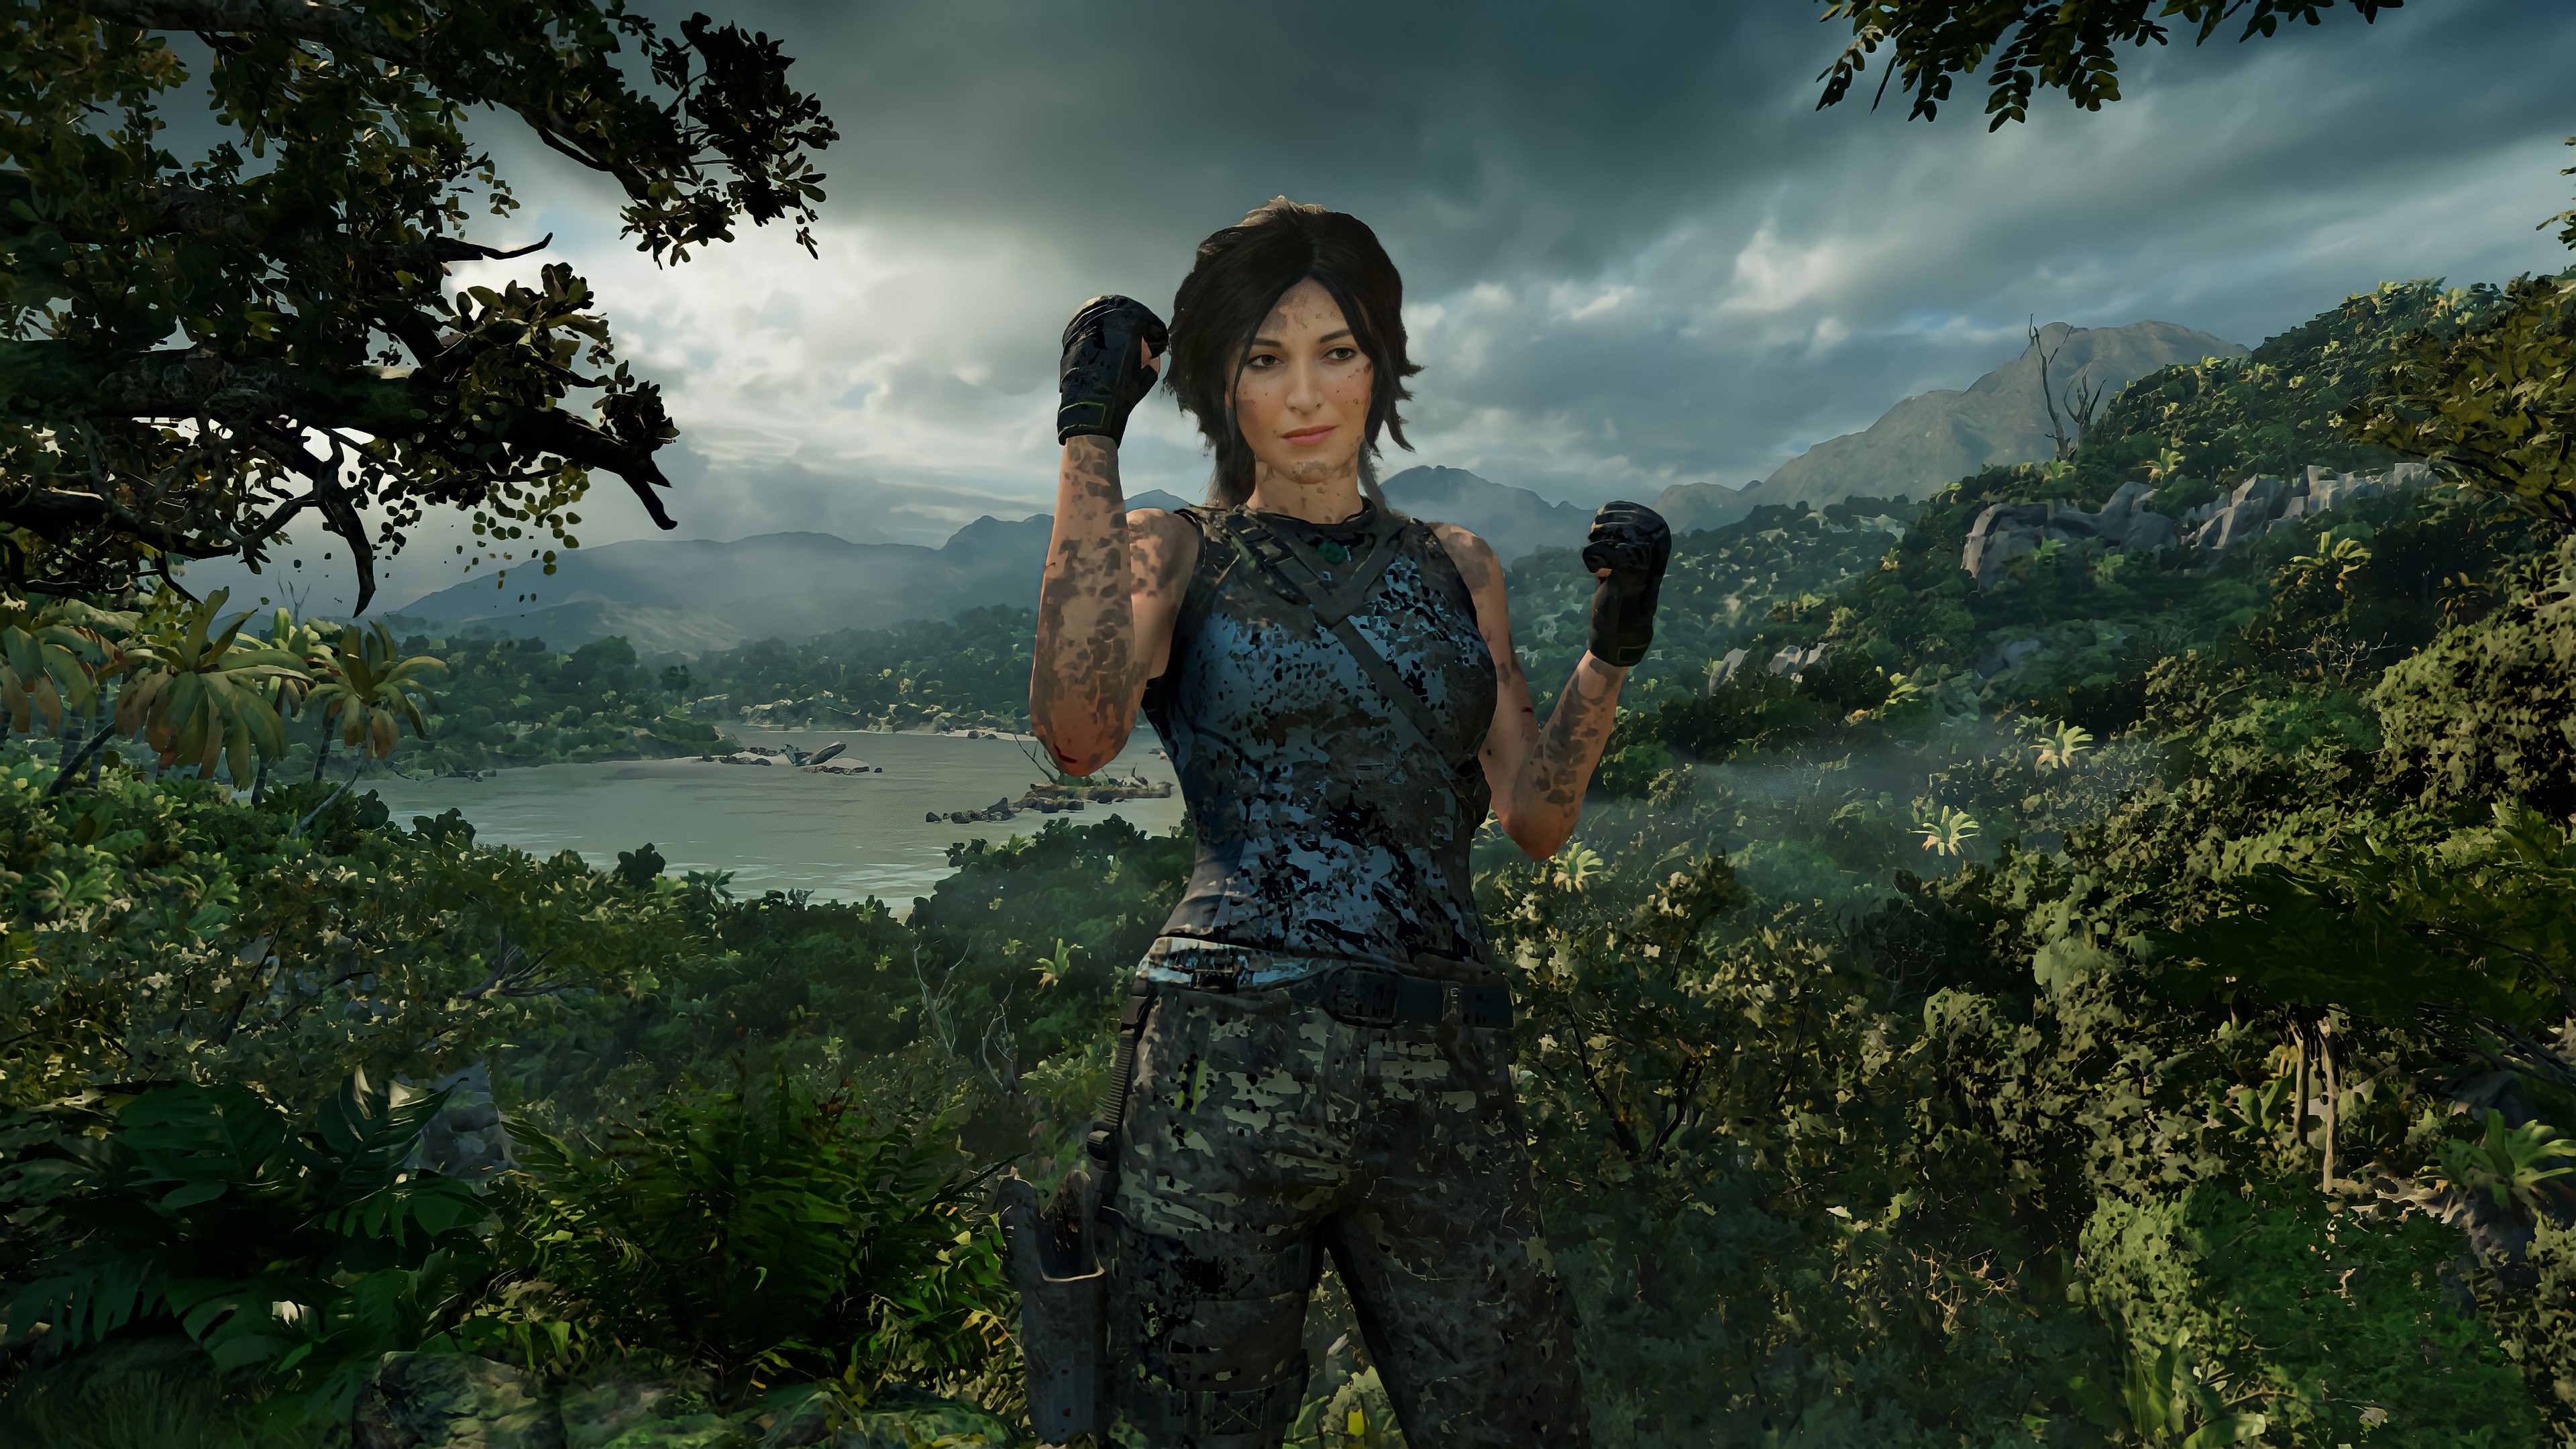 Shadow Of The Tomb Raider Lara Croft Video Game Girls Video Game Characters Video Games Screen Shot 3840x2160